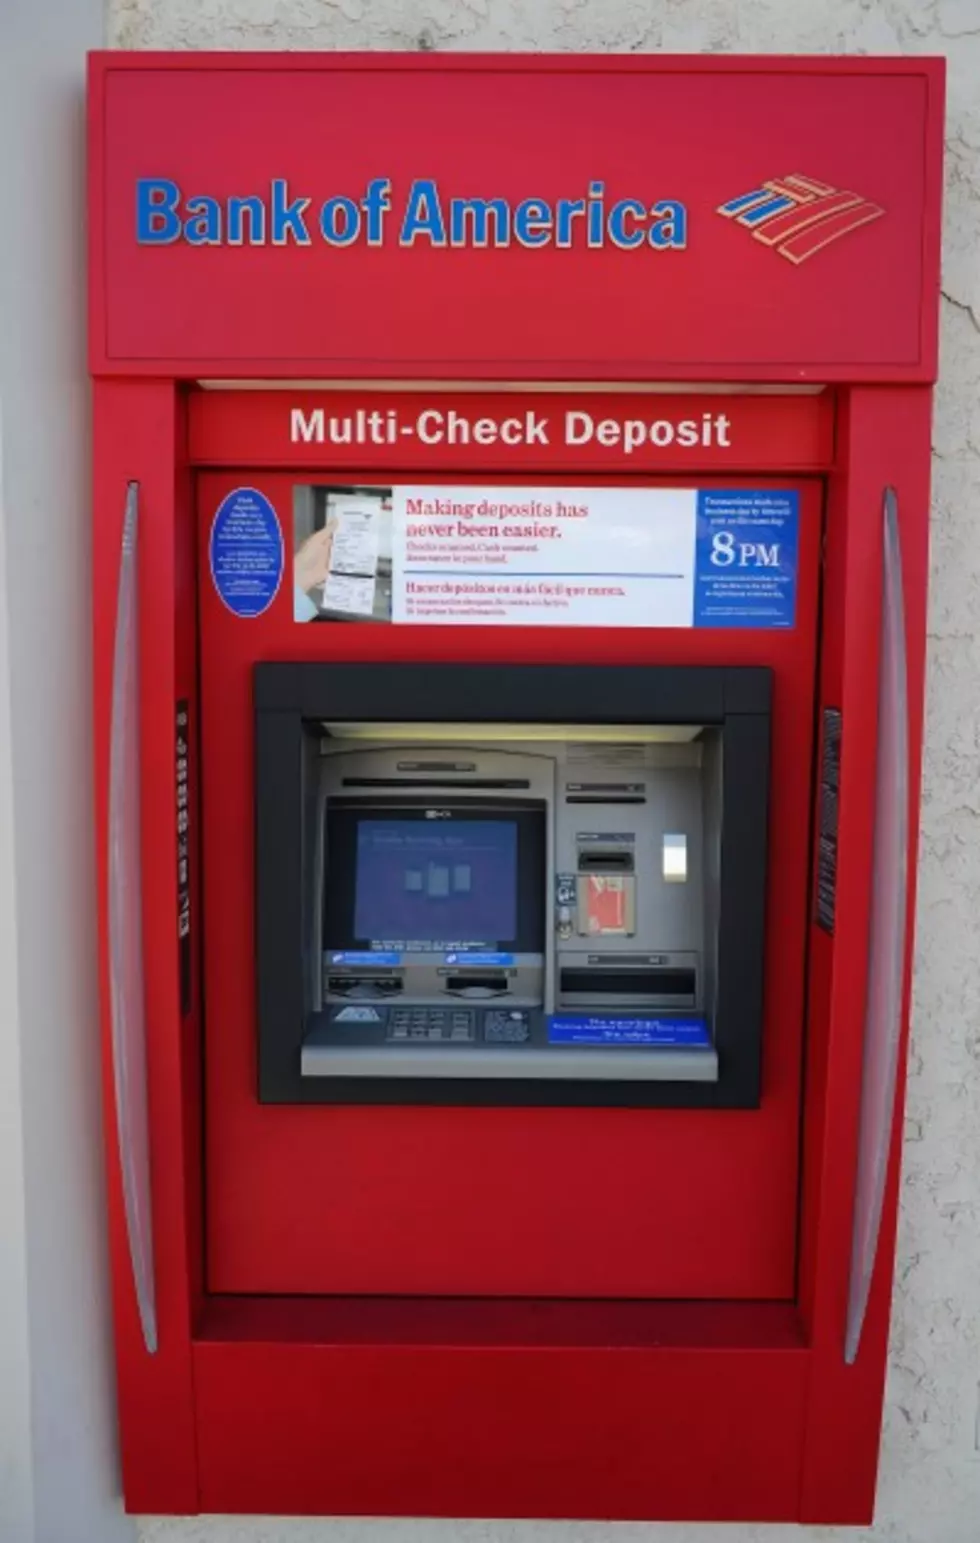 Skimmer Device Found on Local ATM